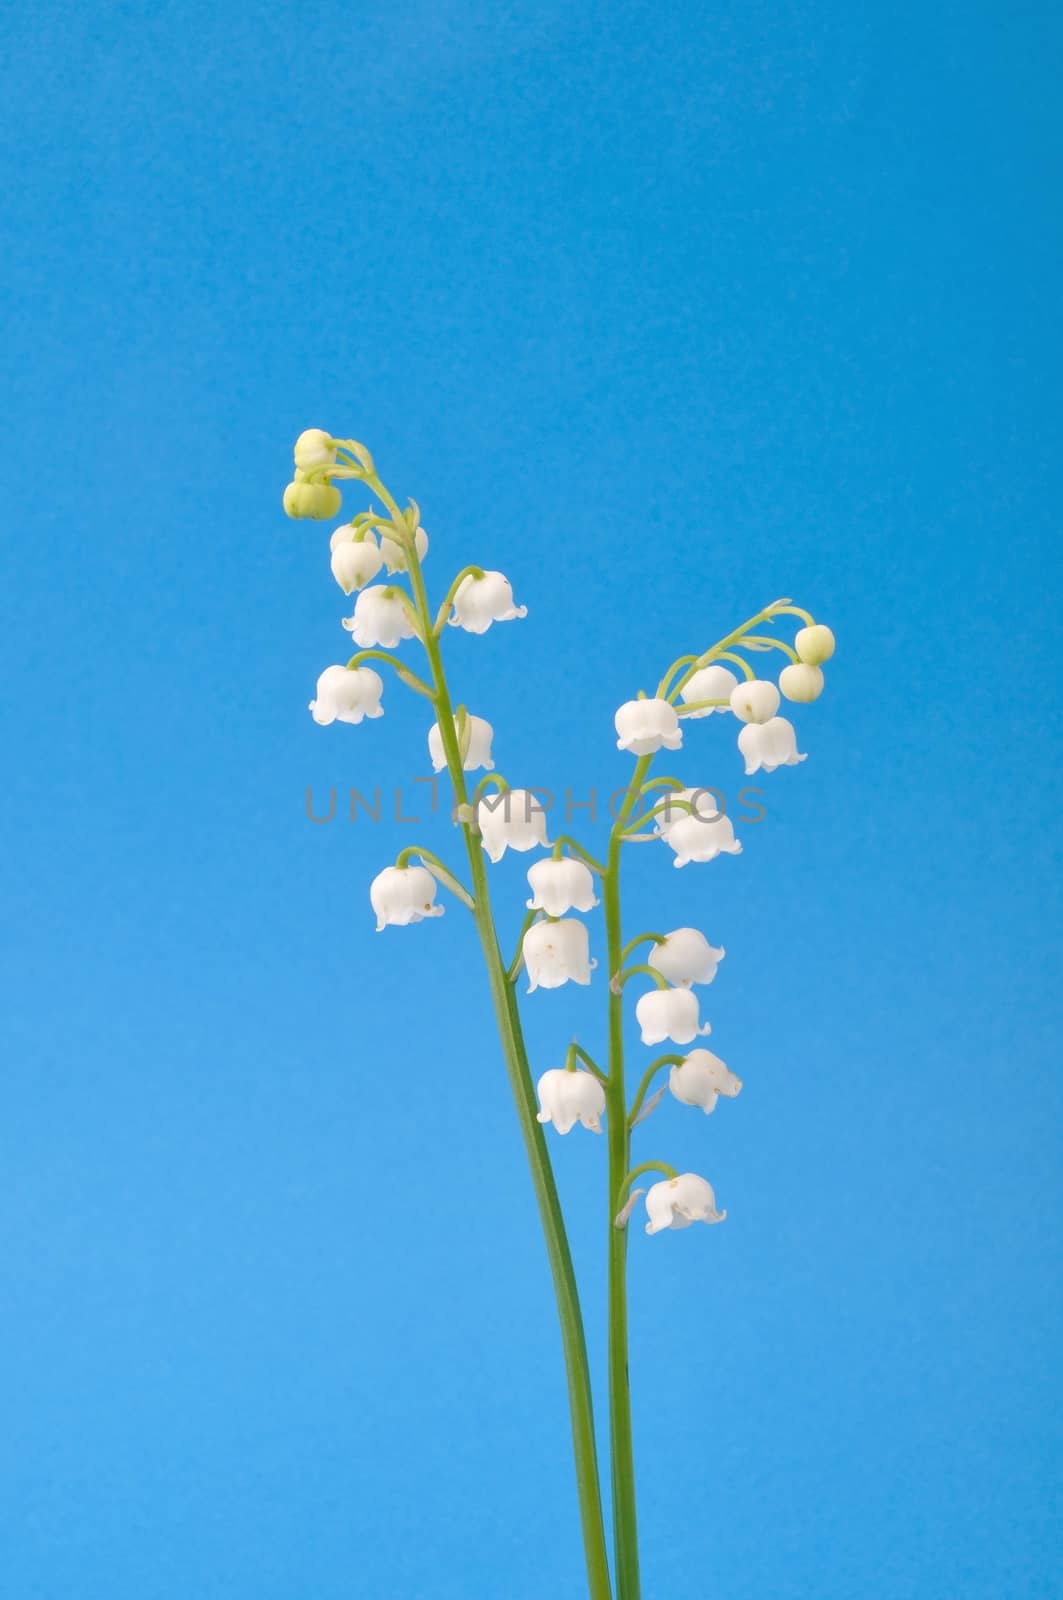 lily of the valley
	
